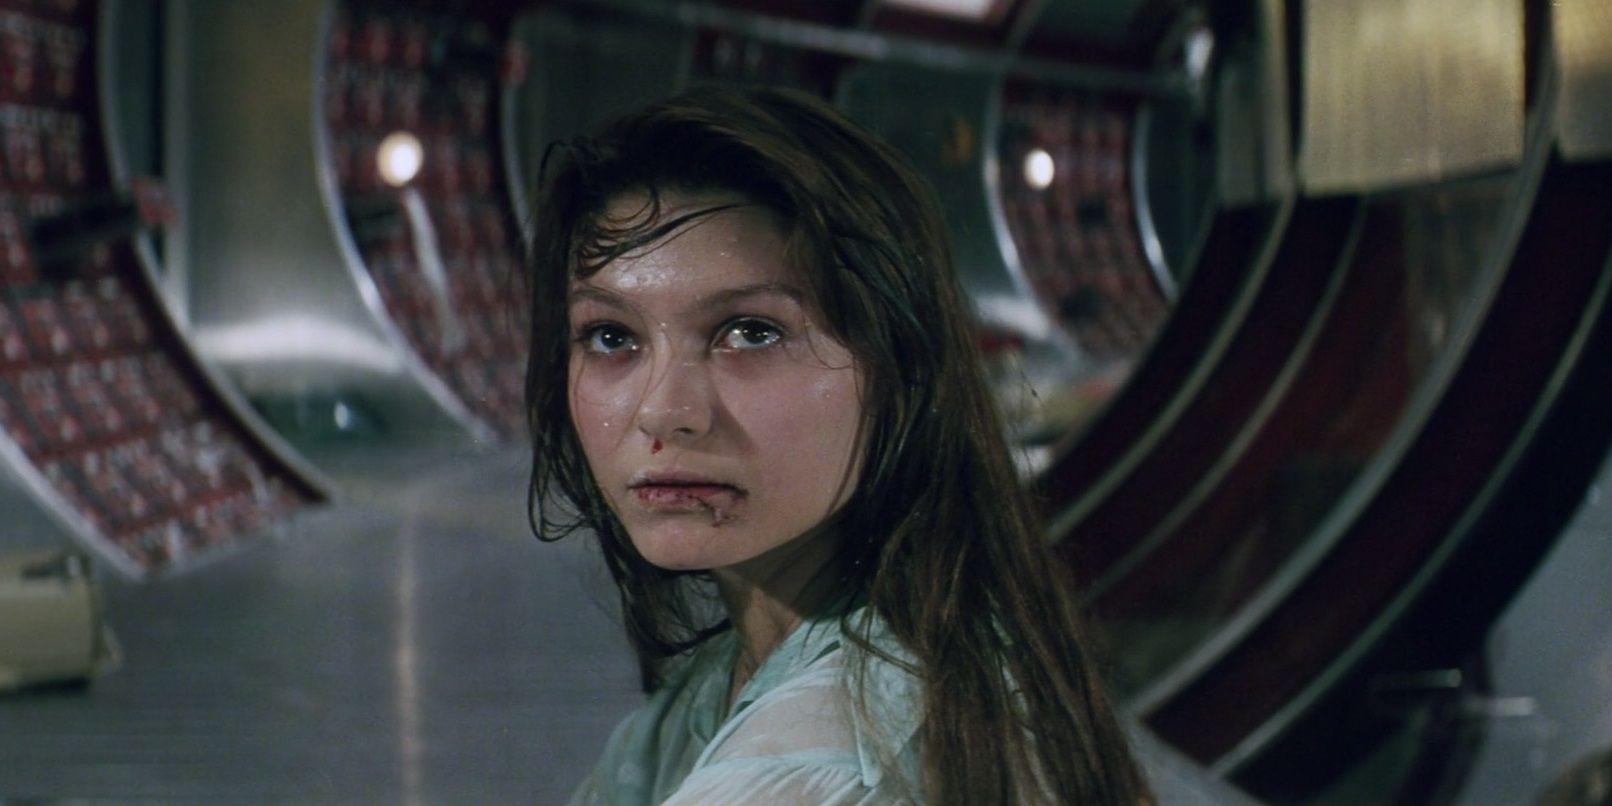 A woman looks behind her in a space station in Solaris.